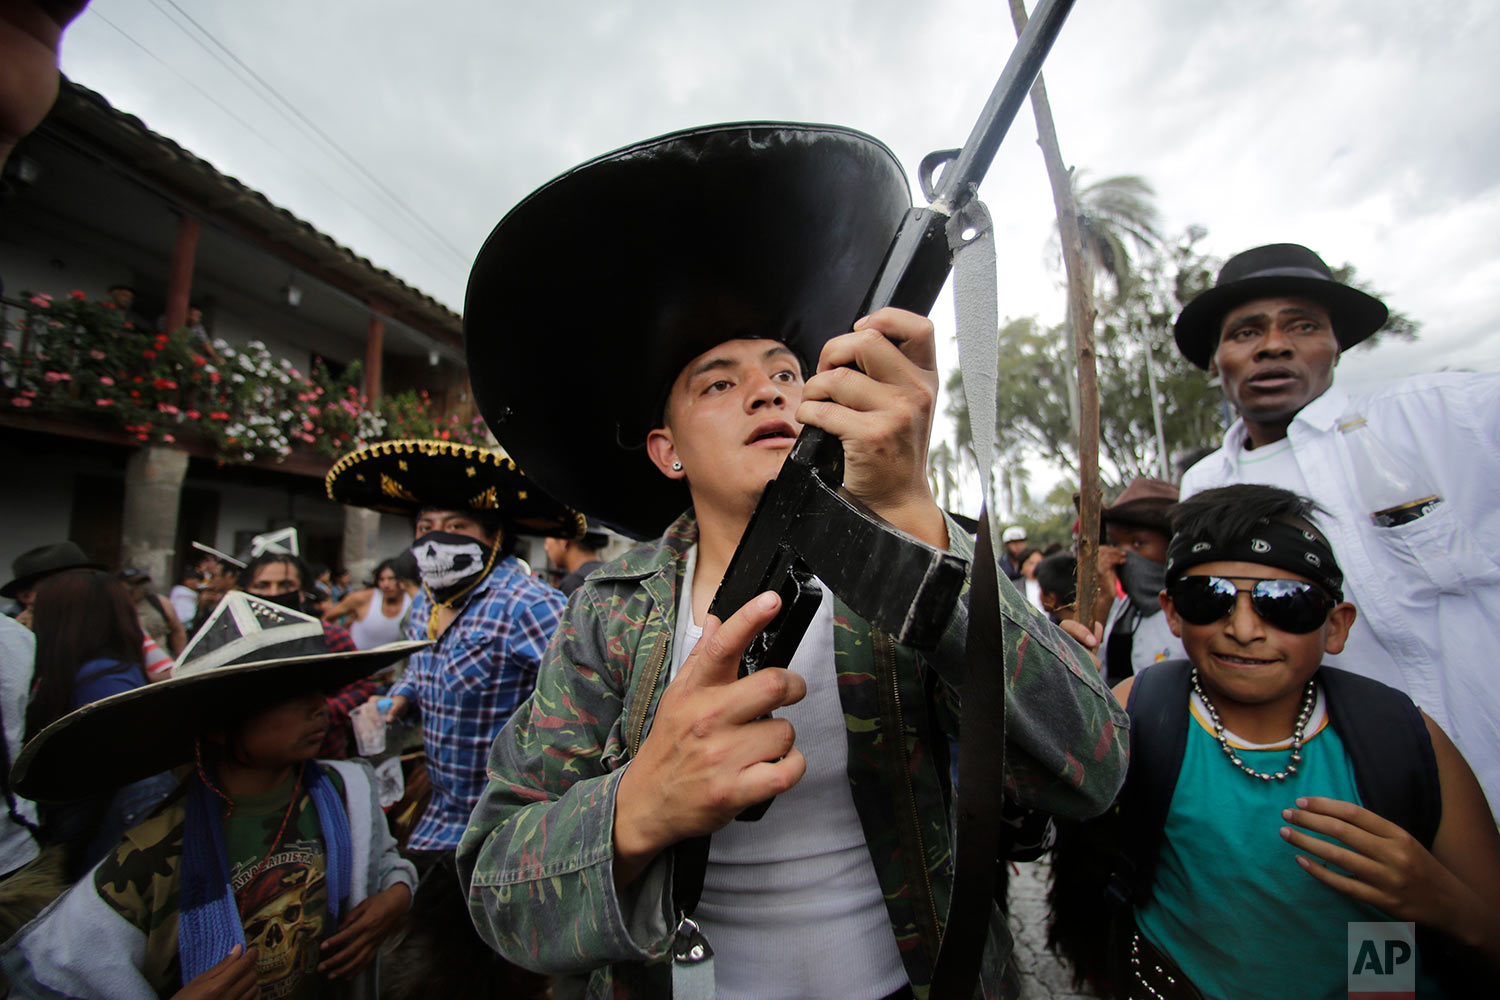  Indigenous men in costume, one holding a mock gun made of wood, dance to the rhythm of the monotonous tune of San Juanito, as groups from different communities compete to occupy the main plaza during the Sun Festival in Cotacachi, Ecuador, June 24, 